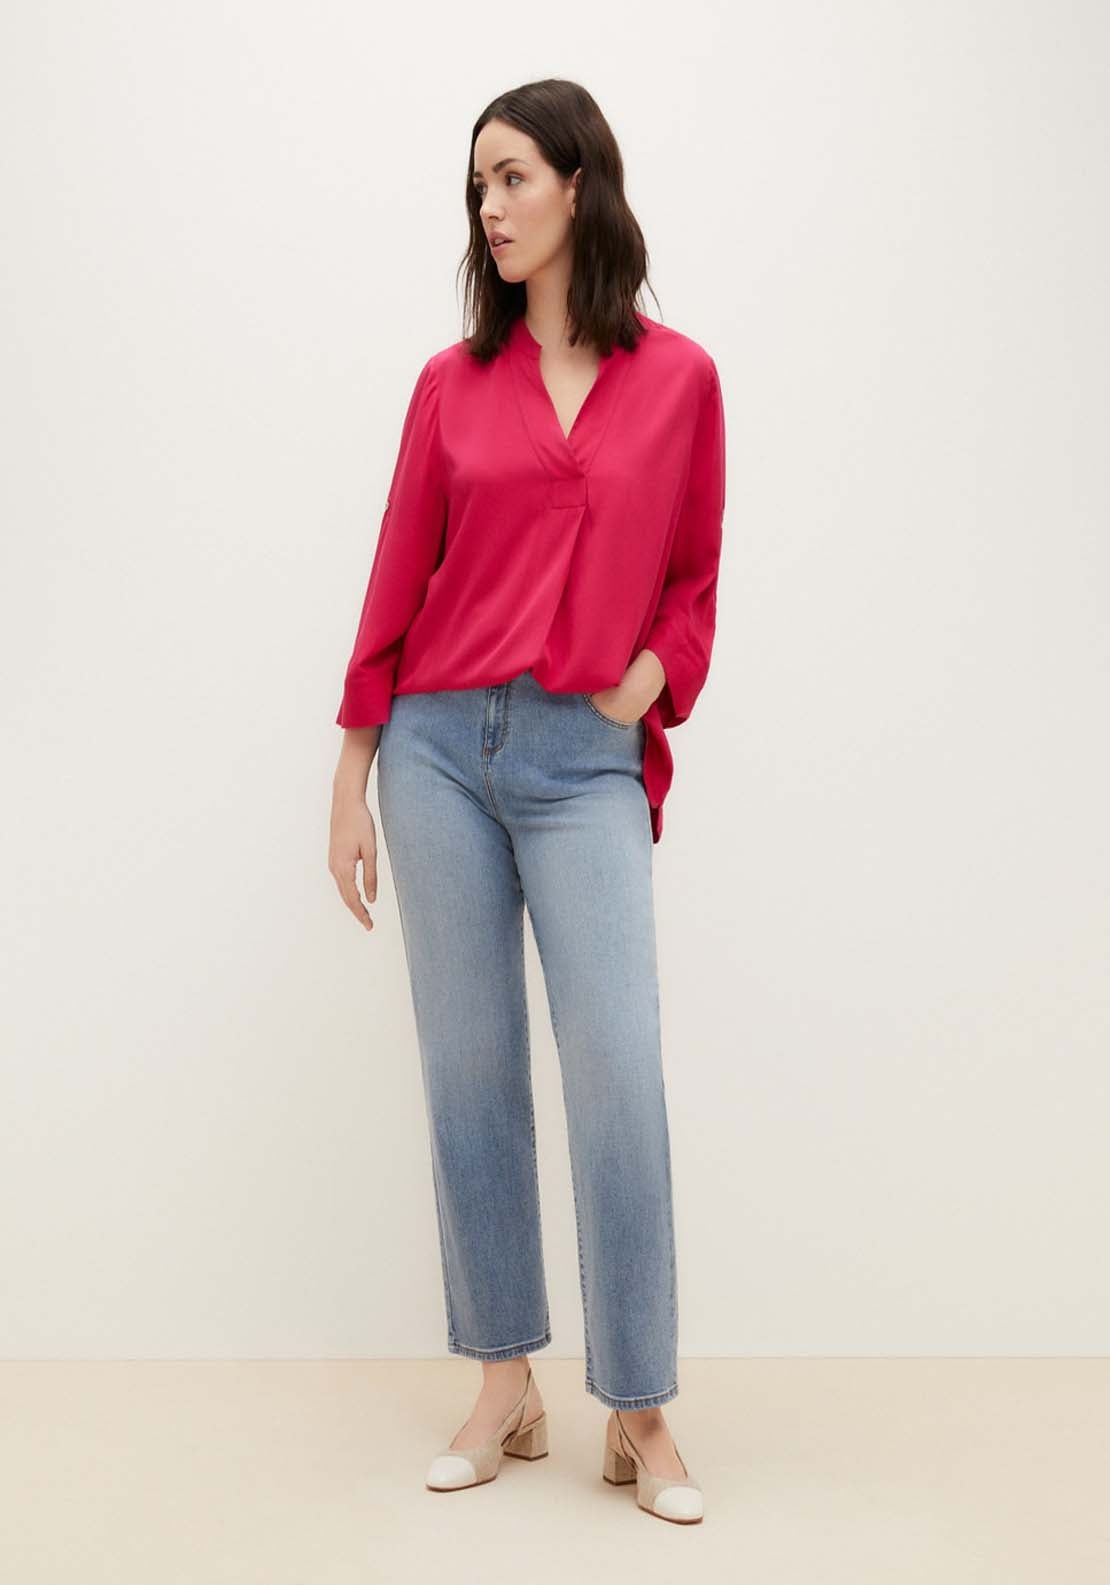 Couchel Long Sleeve Blouse - Fuchsia 3 Shaws Department Stores